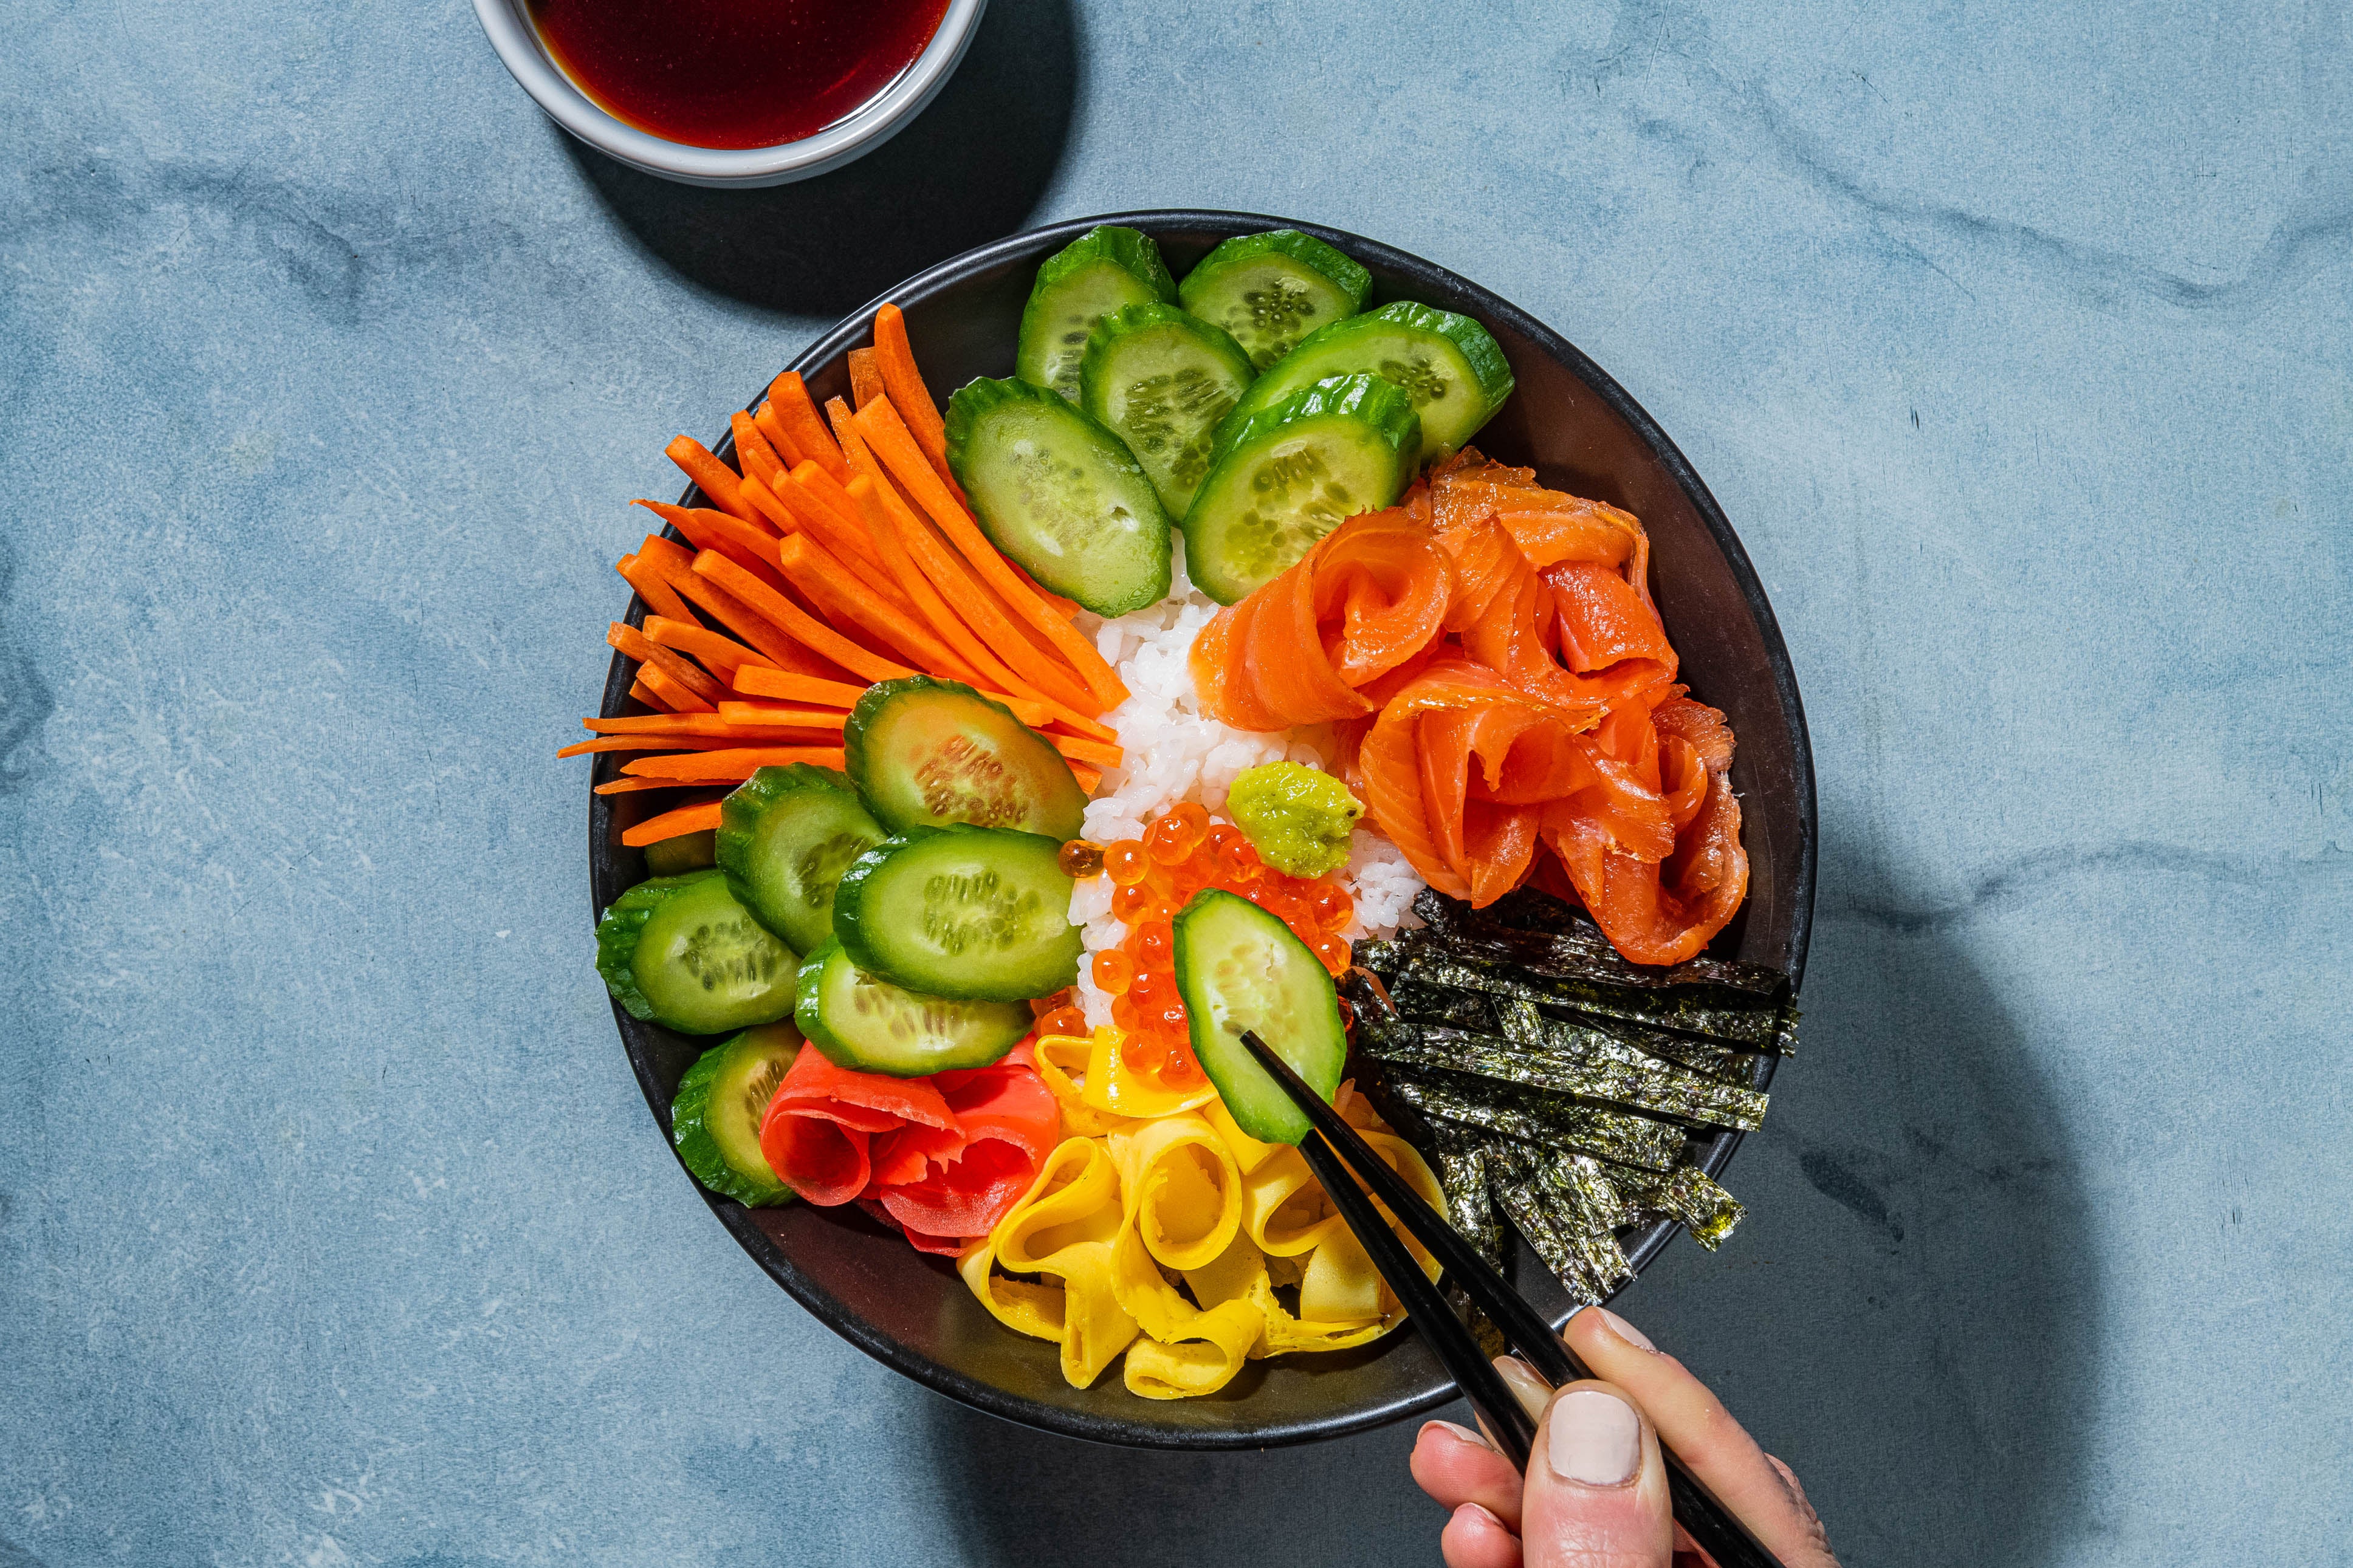 You can use whatever you have in the fridge in this sushi bowl